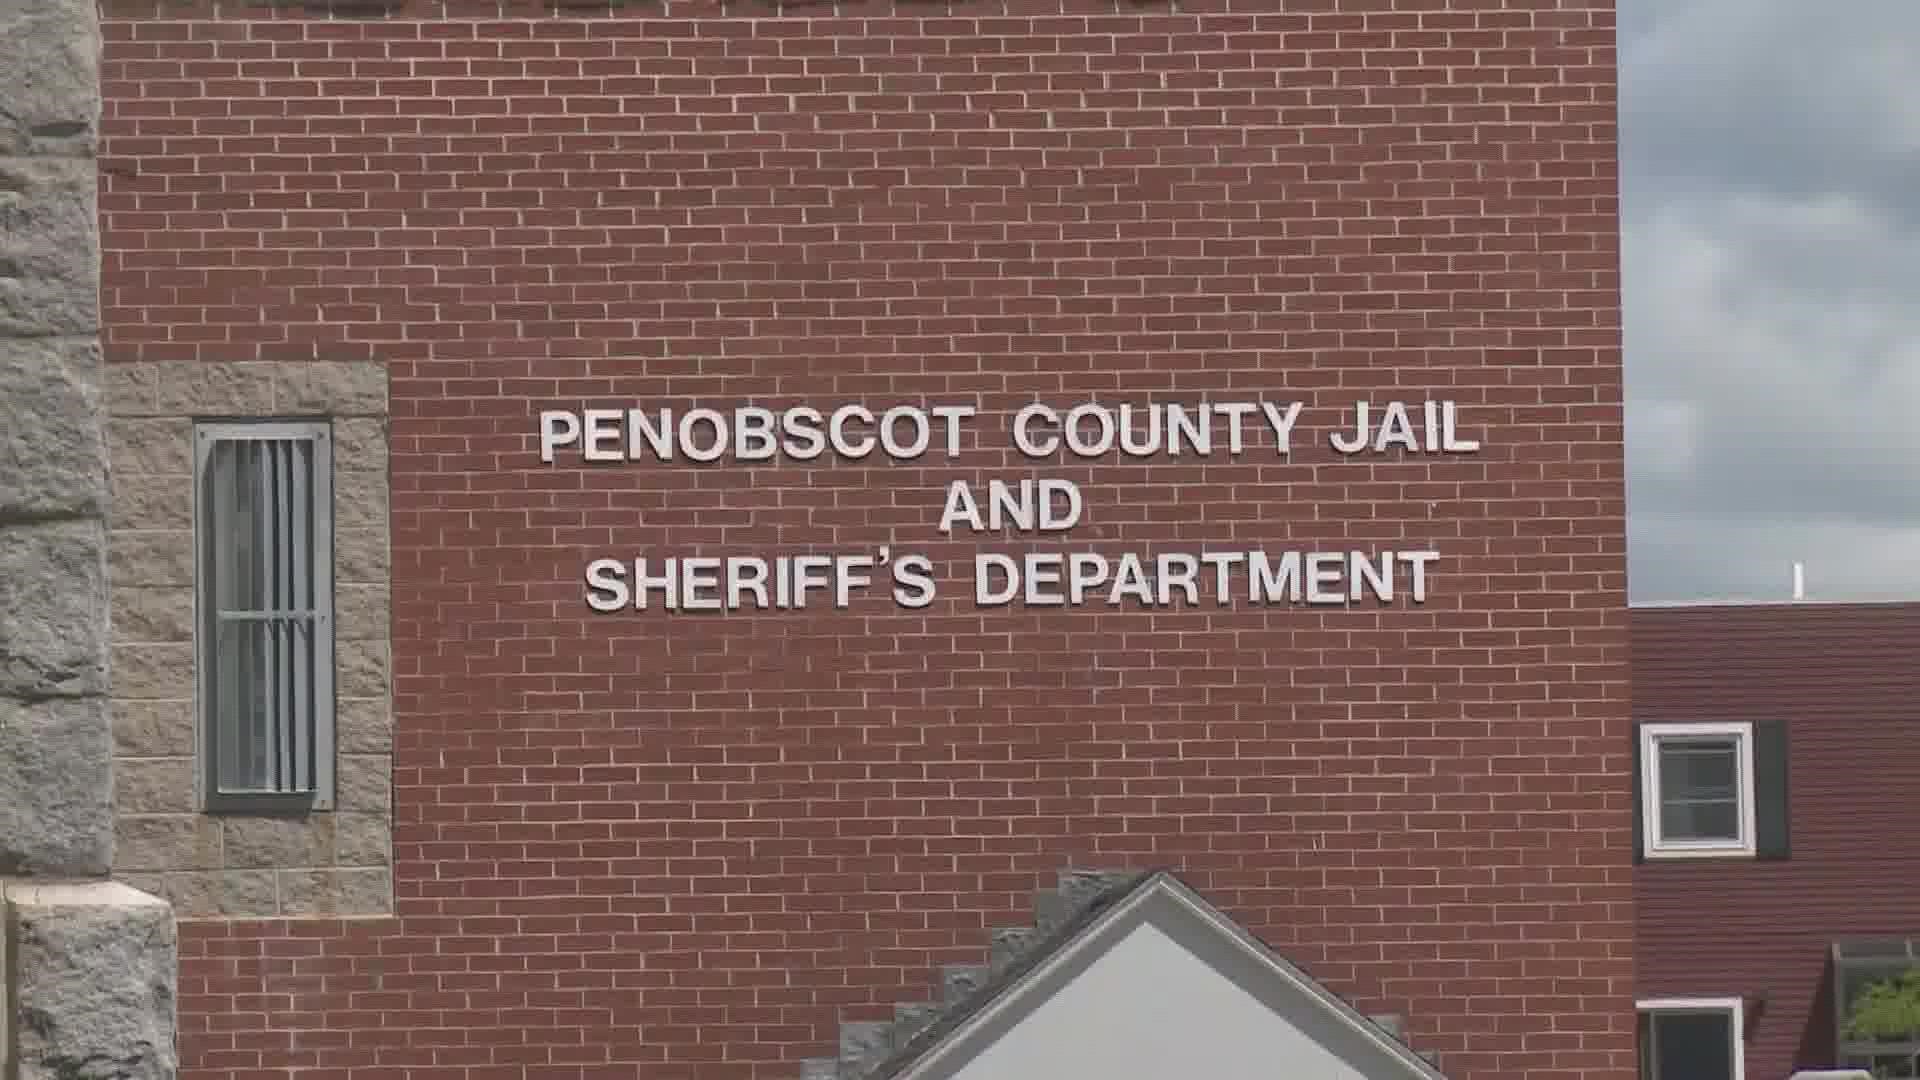 As the overcrowding problem at the Penobscot County jail continues, city officials are speaking up.